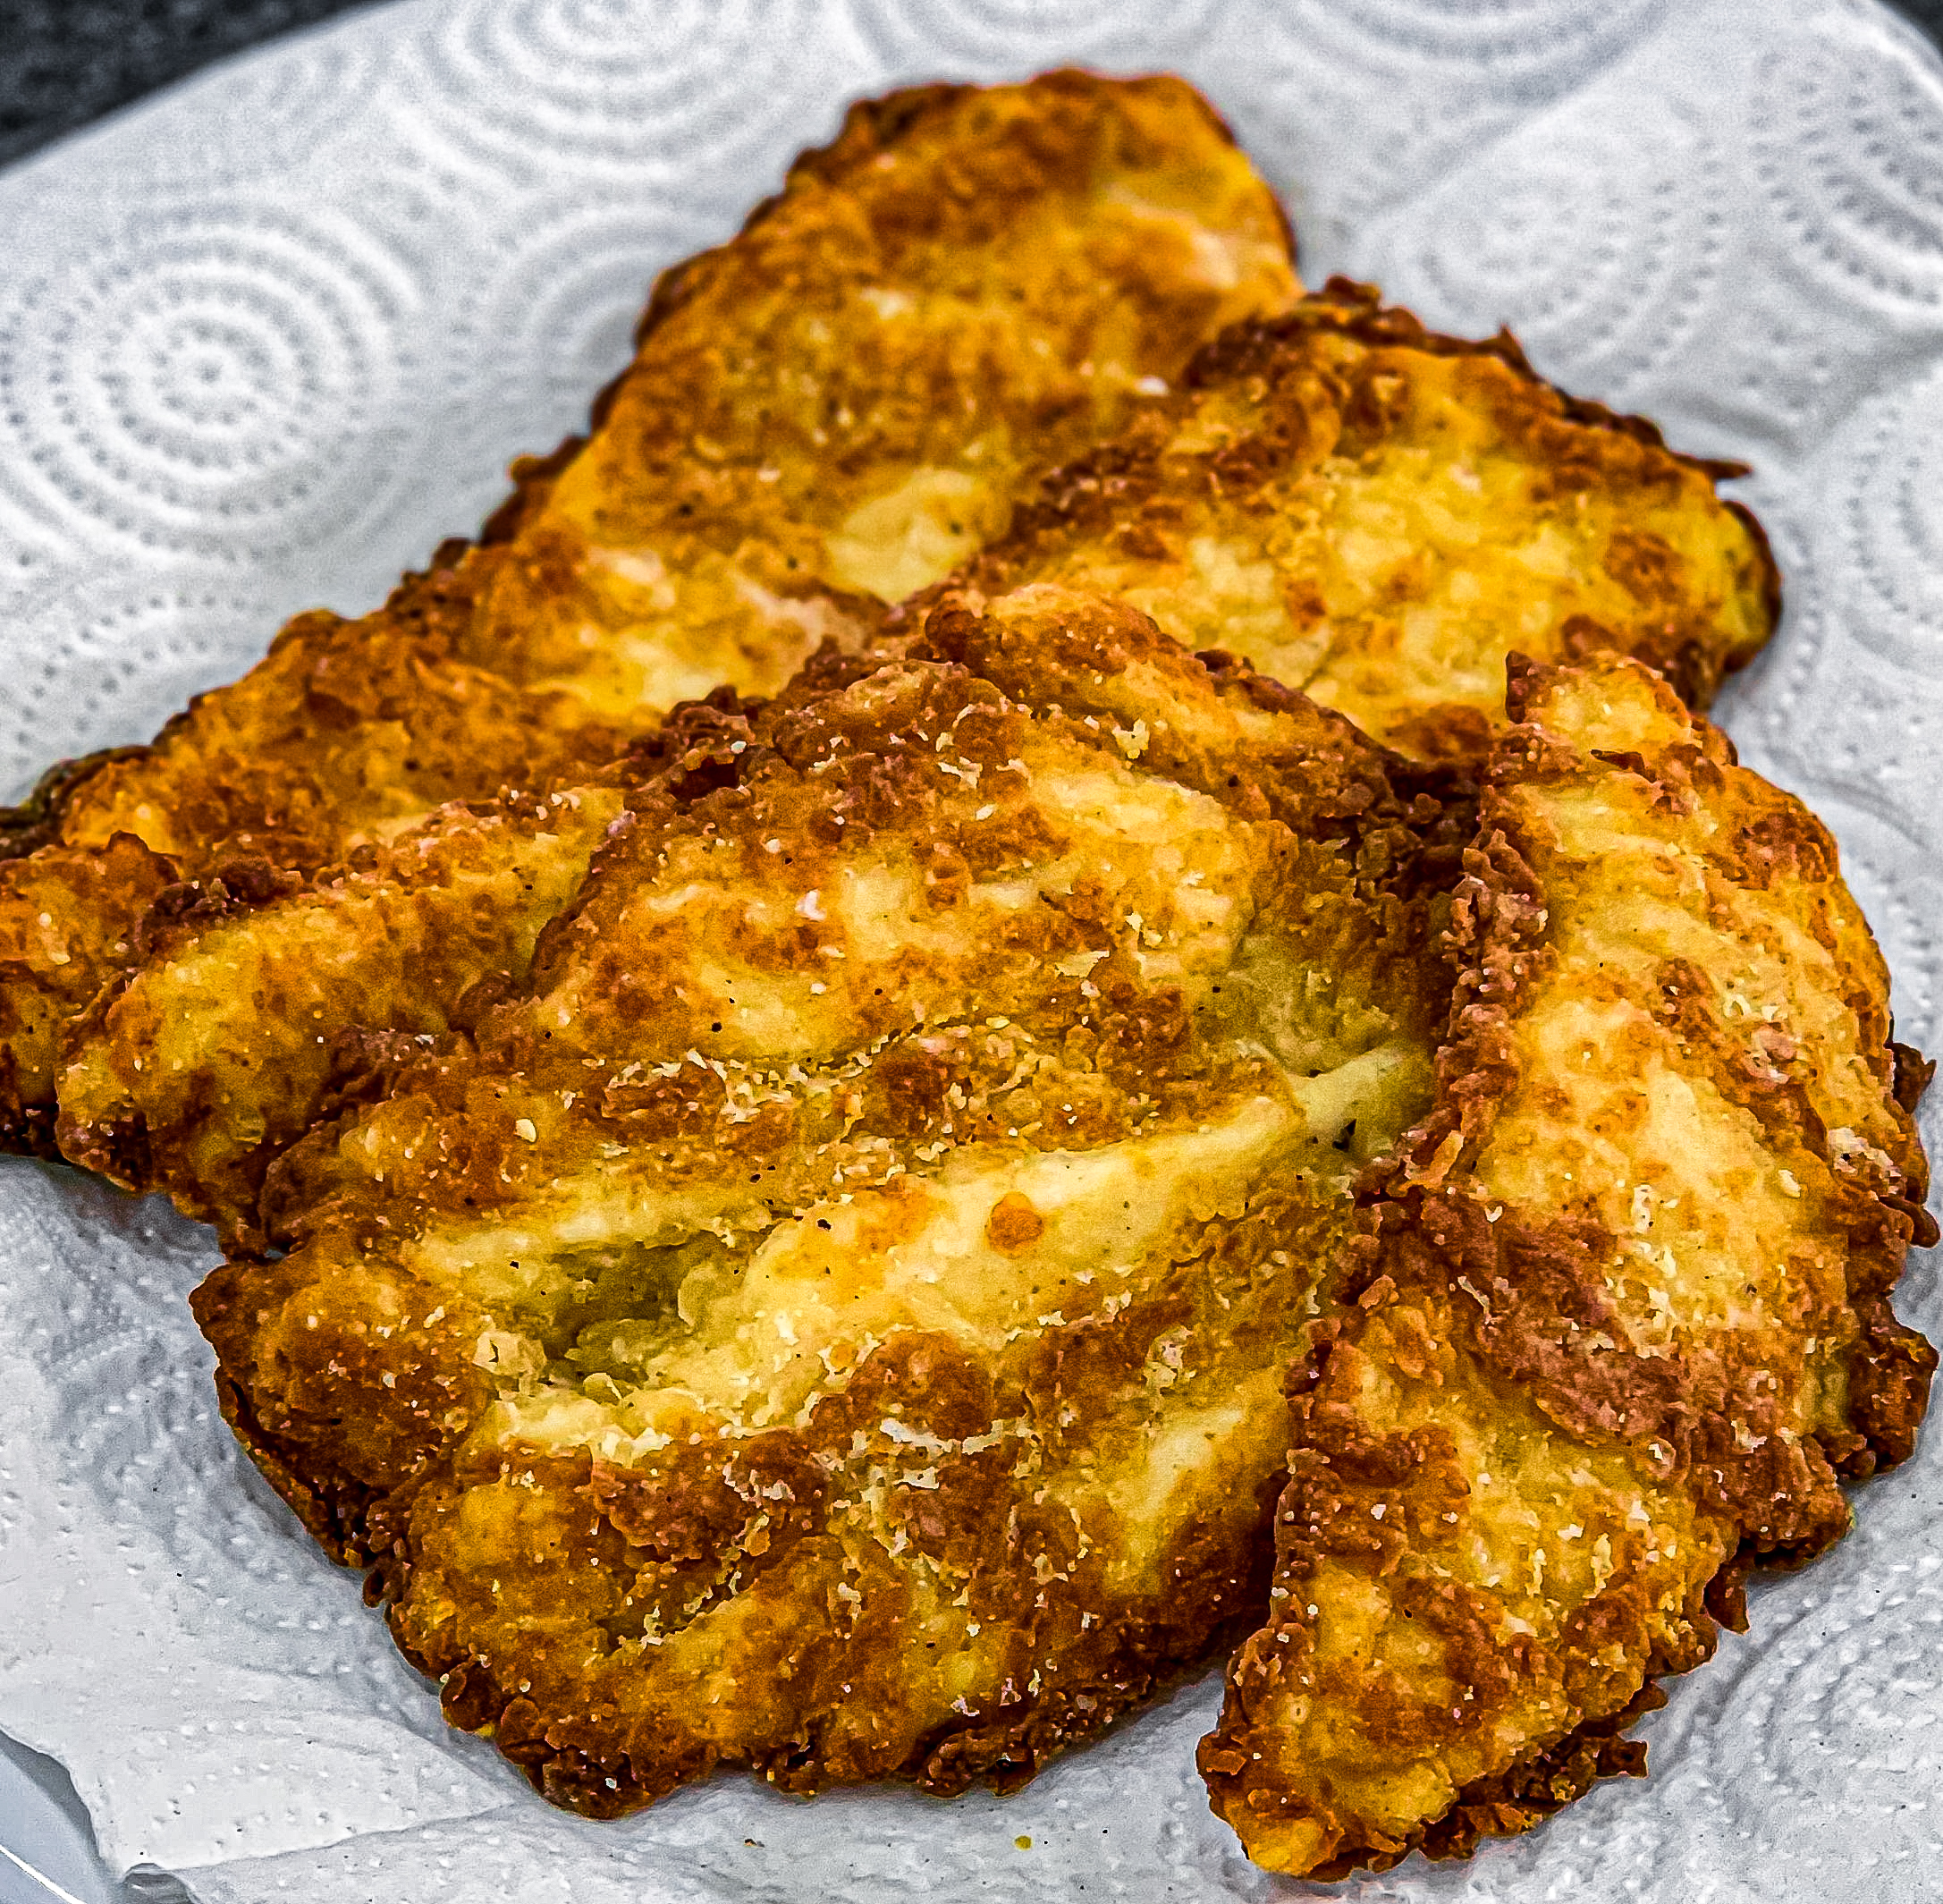 https://sweetpeaskitchen.com/wp-content/uploads/2021/03/Southern-style-Country-Fried-Chicken-recipe-card.jpg